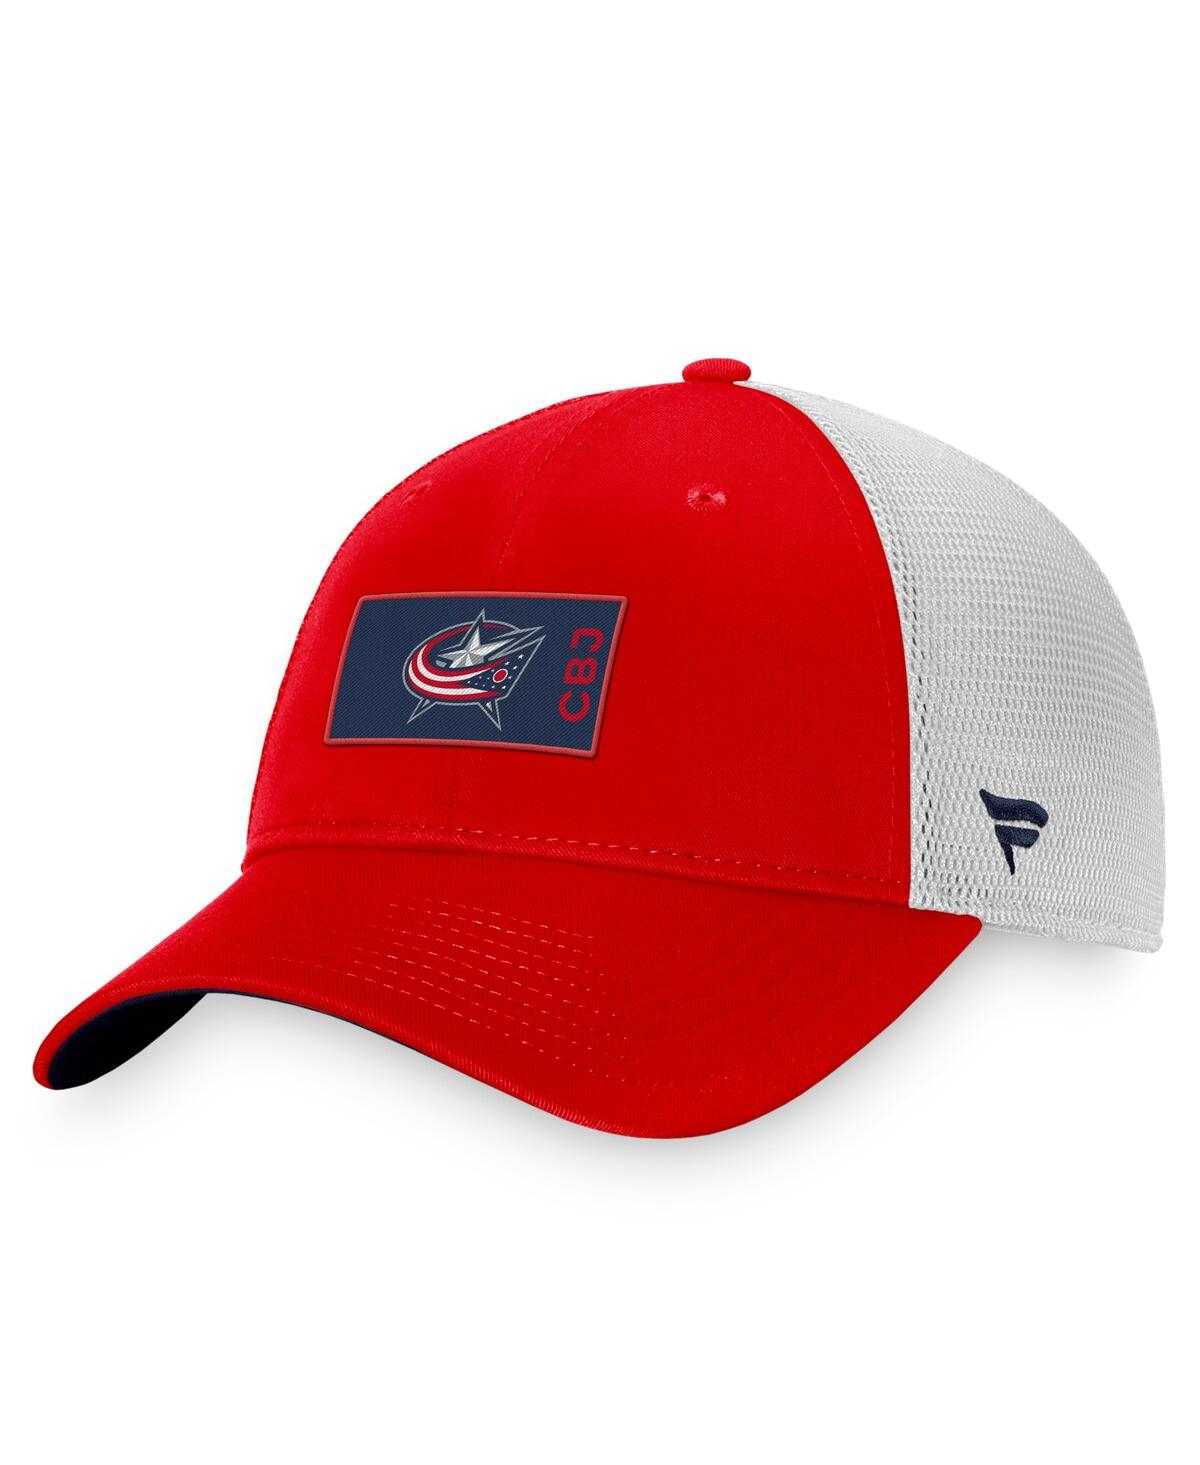 Men's Fanatics Red, White Columbus Blue Jackets Authentic Pro Rink Trucker Snapback Hat - Red, White